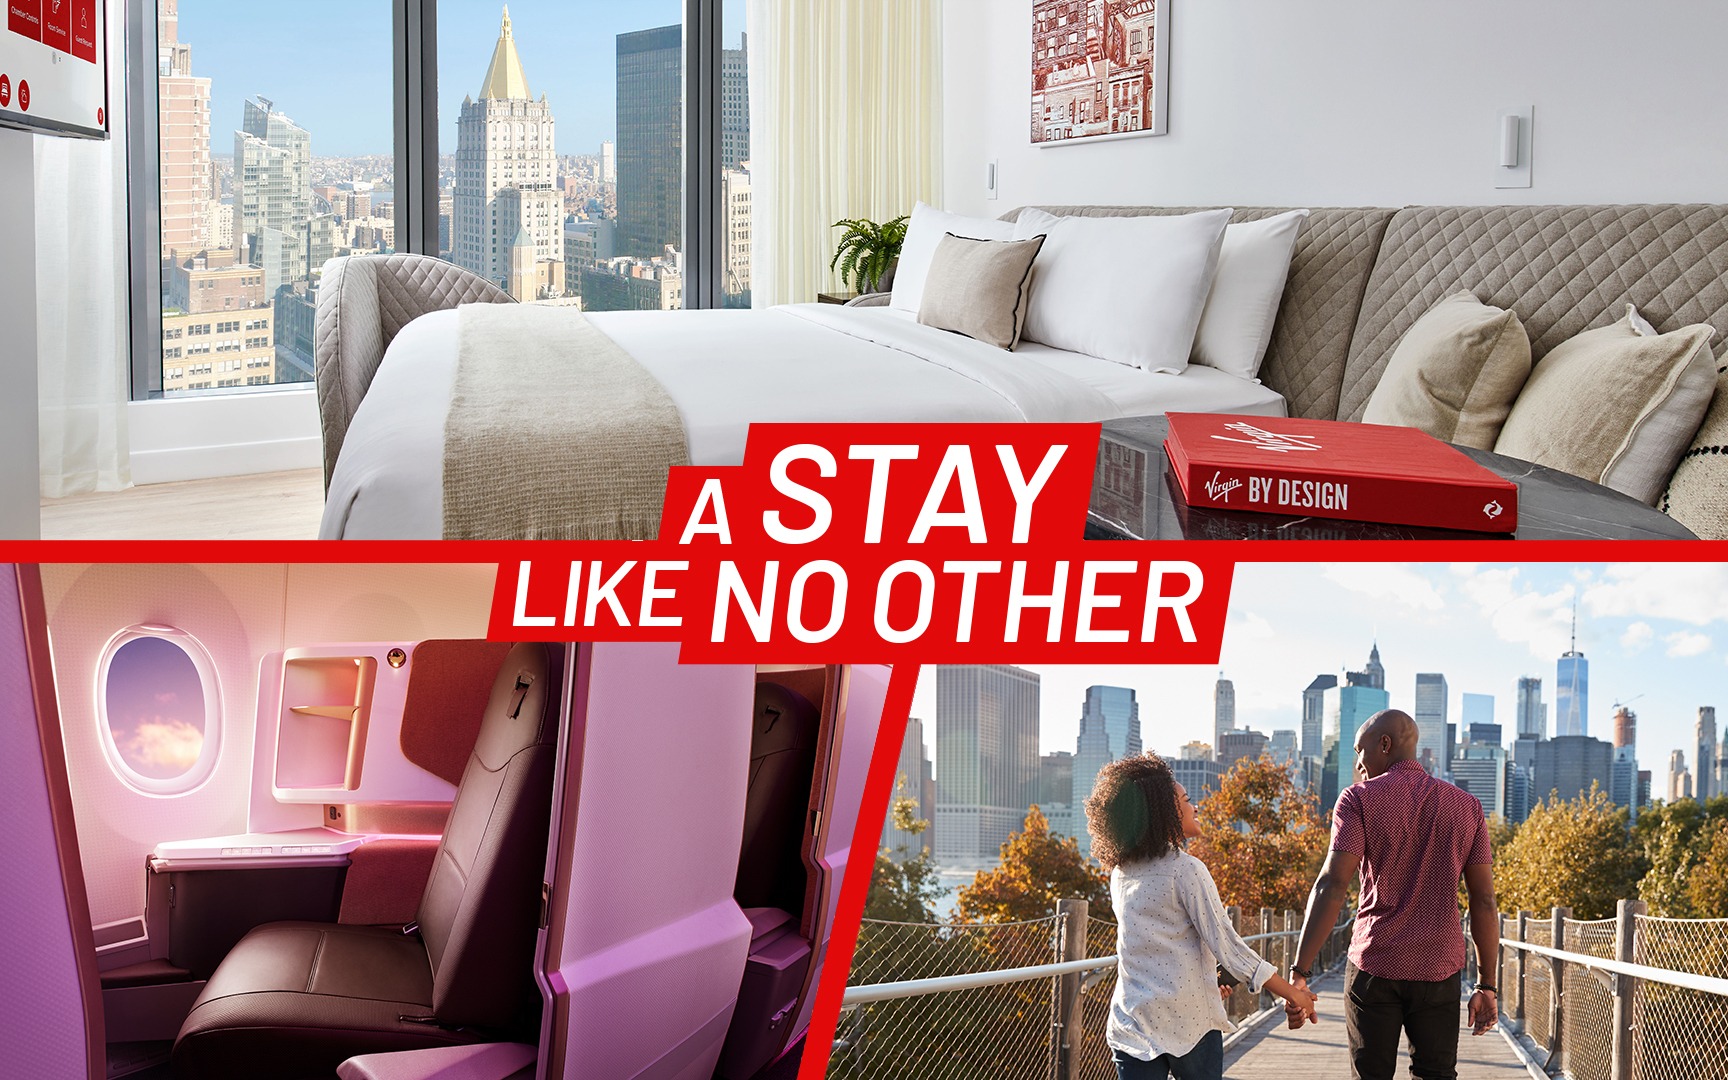 Image of Virgin Hotels New York chamber, a couple in New York, and a lady being served in Upper Class at Virgin Atlantic.